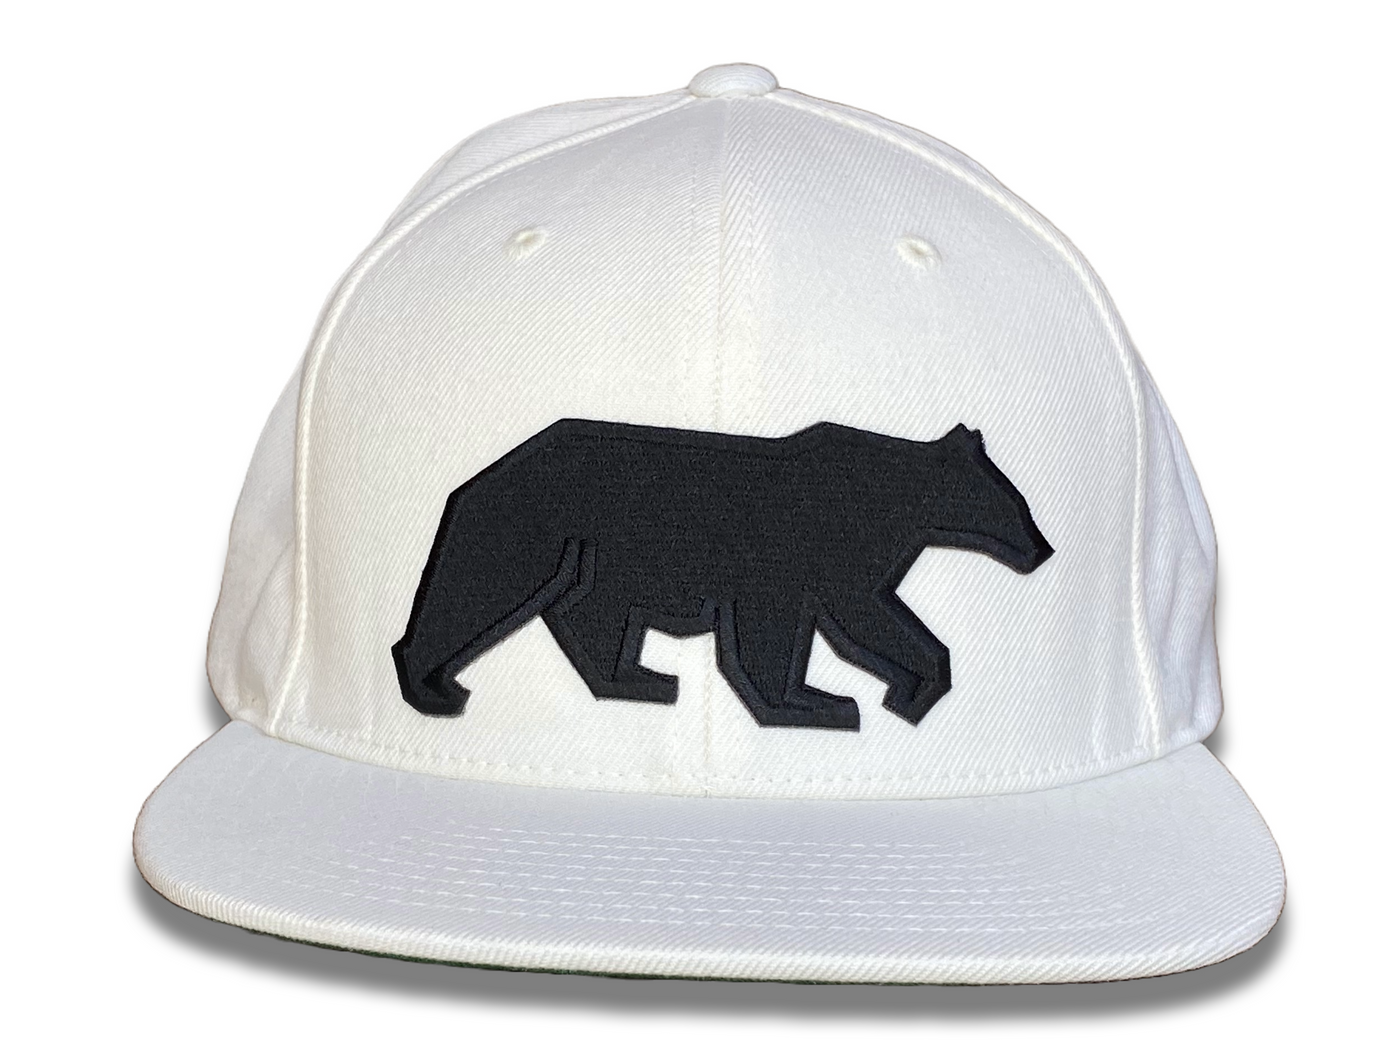 Solid White 6-Panel Flatbill Trucker Hat with Black Bear Patch